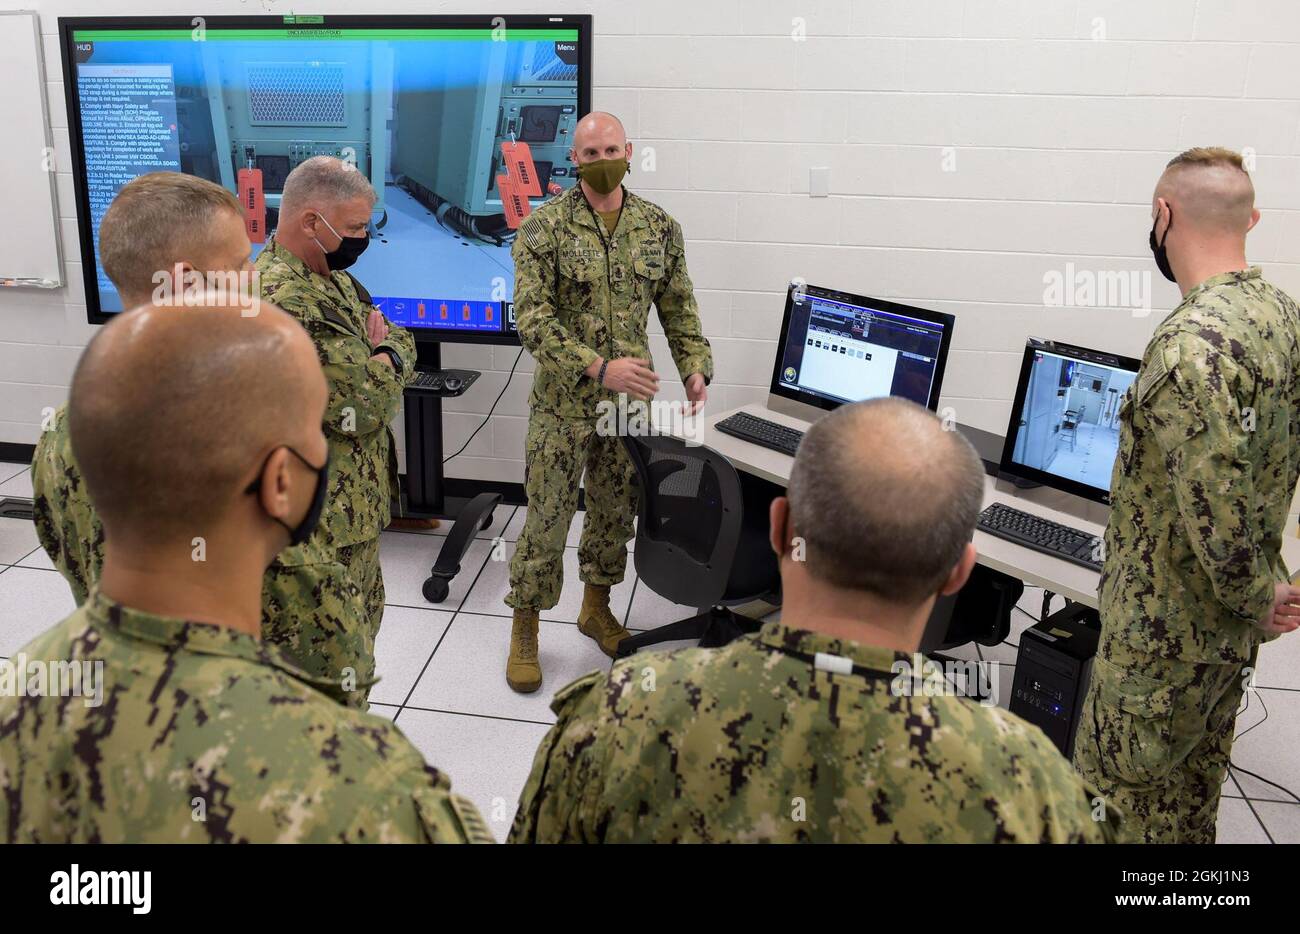 210428-N-KJ380-1056 PENSACOLA, Fla. (April 28, 2021) - Chief of Naval Personnel Vice Adm. John B. Nowell Jr. (2nd from left)  participates in a Multipurpose Reconfigurable Training System 3D® (MRTS 3D®) technology training device demonstration and discussion with staff at the Center for Information Warfare Training and Information Warfare Training Command (IWTC) Corry Station. Nowell, along with Fleet Master Chief Wes Koshoffer, visited for a familiarization brief and tour of CIWT and IWTC Corry Station onboard Naval Air Station Pensacola Corry Station, Pensacola, Florida. The visit offered an Stock Photo